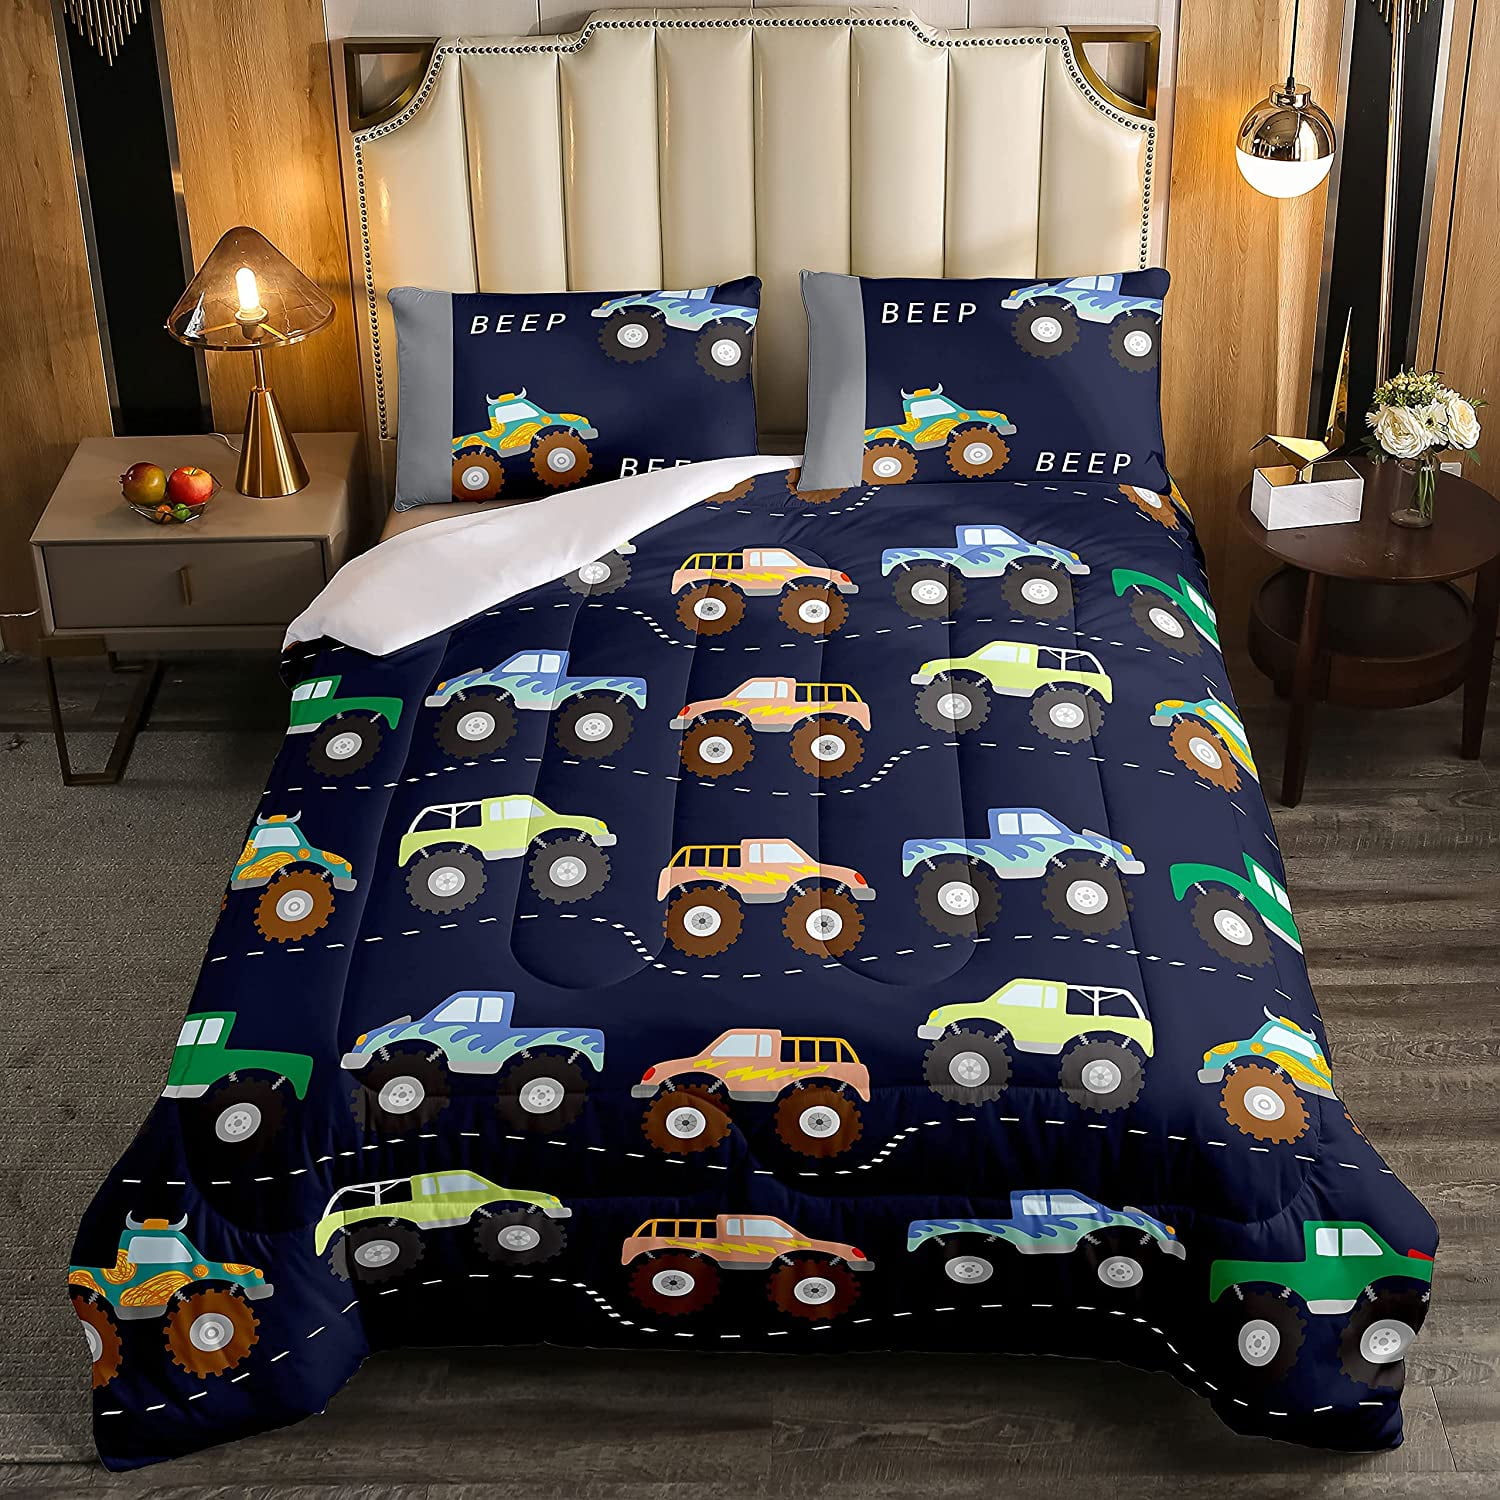 DOCTOR WHO TARDIS POLICE BOX BLUE KING SIZE BED MICROFIBER COMFORTER NEW 102X86 